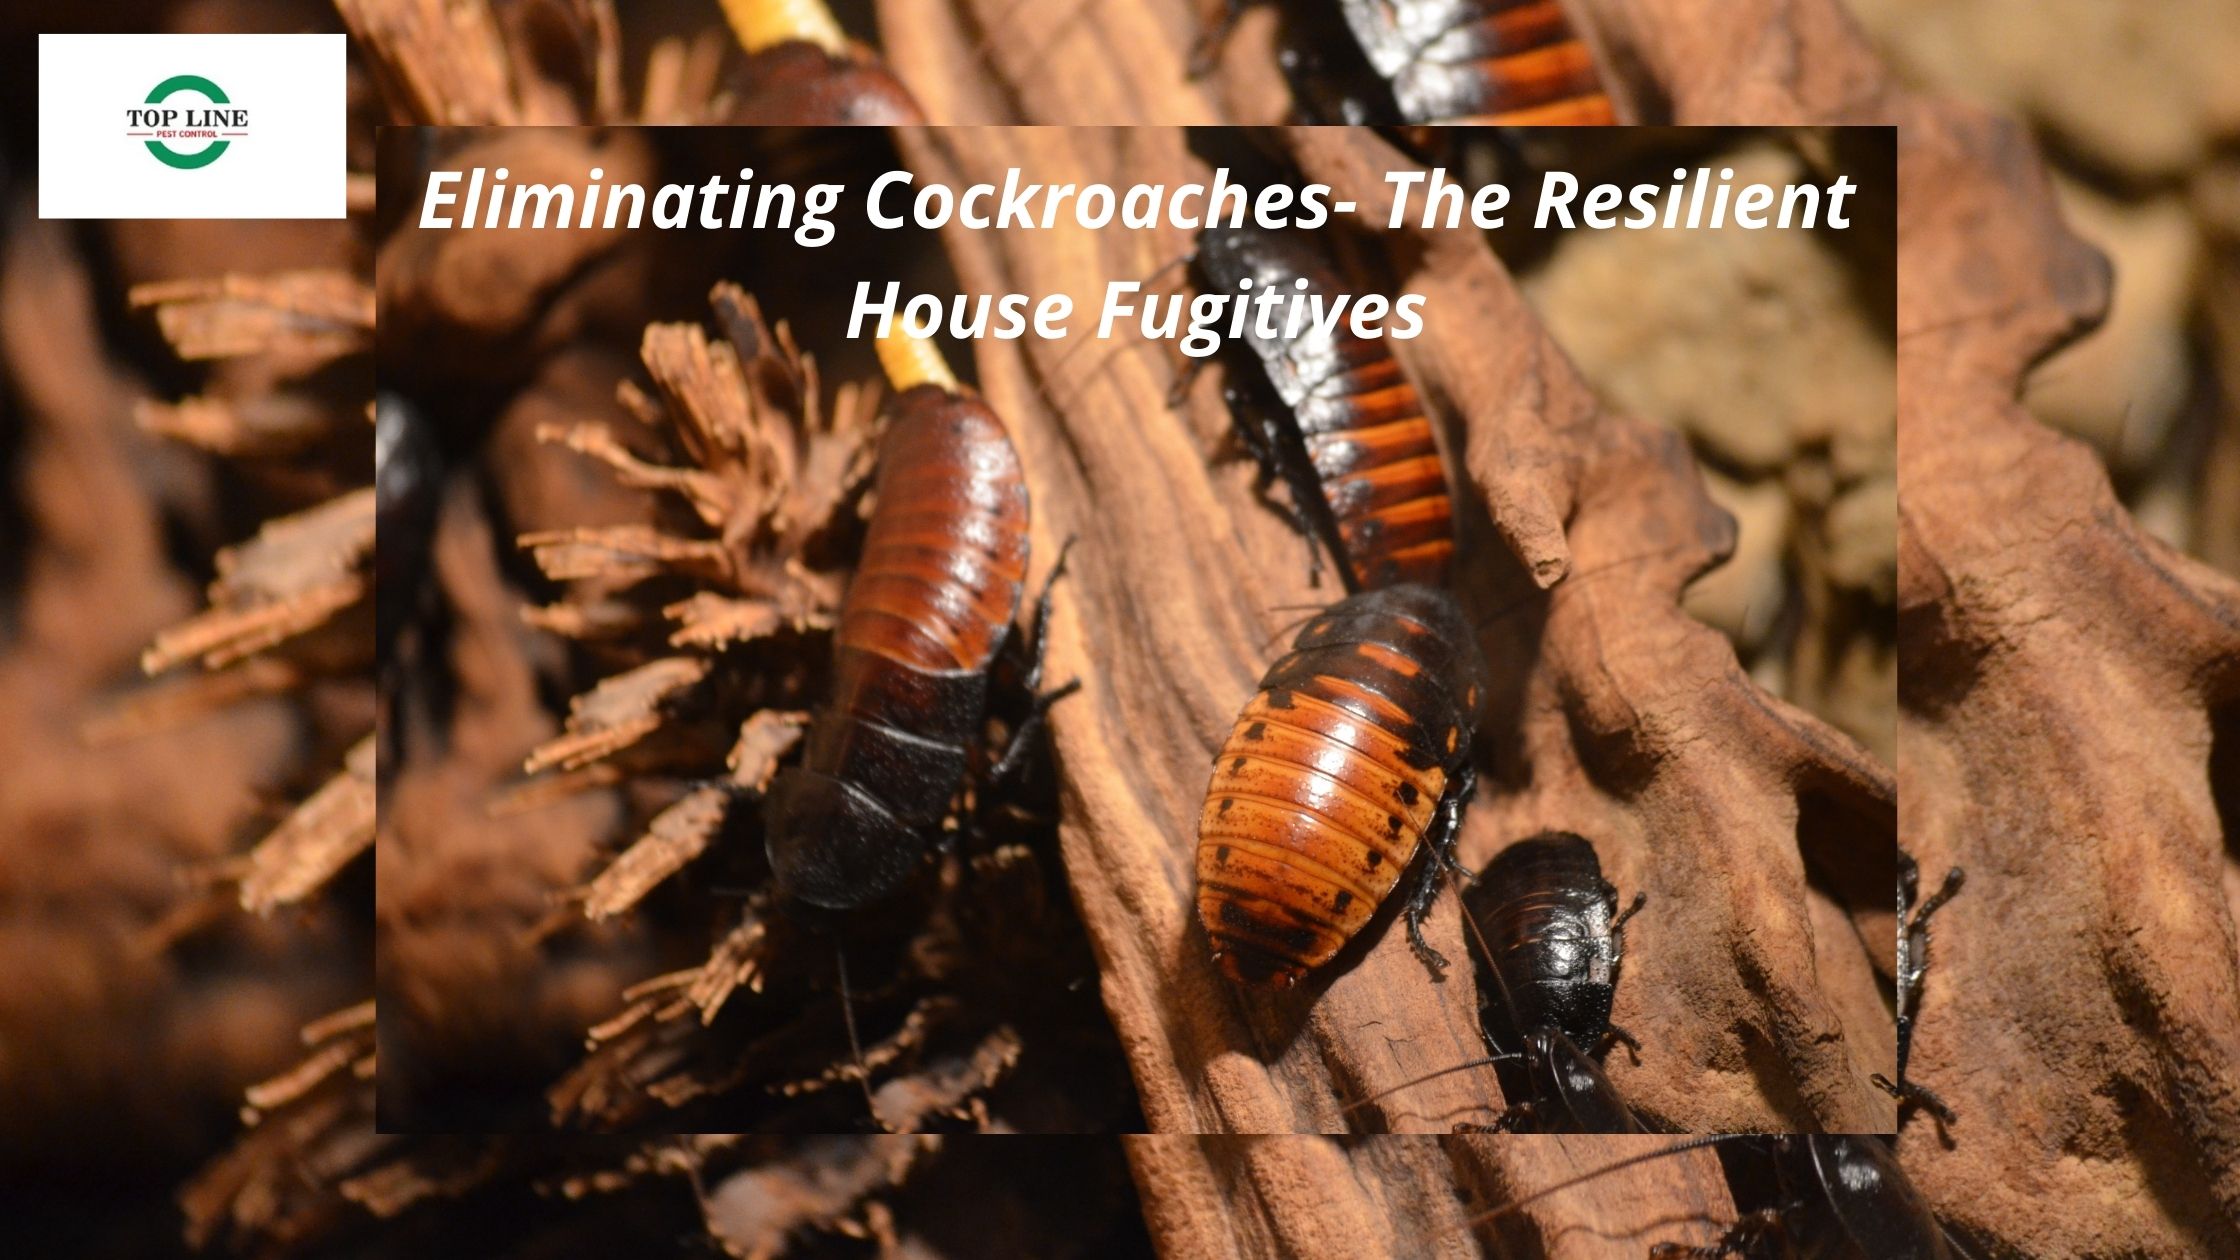 Eliminating Cockroaches- The Resilient House Fugitives